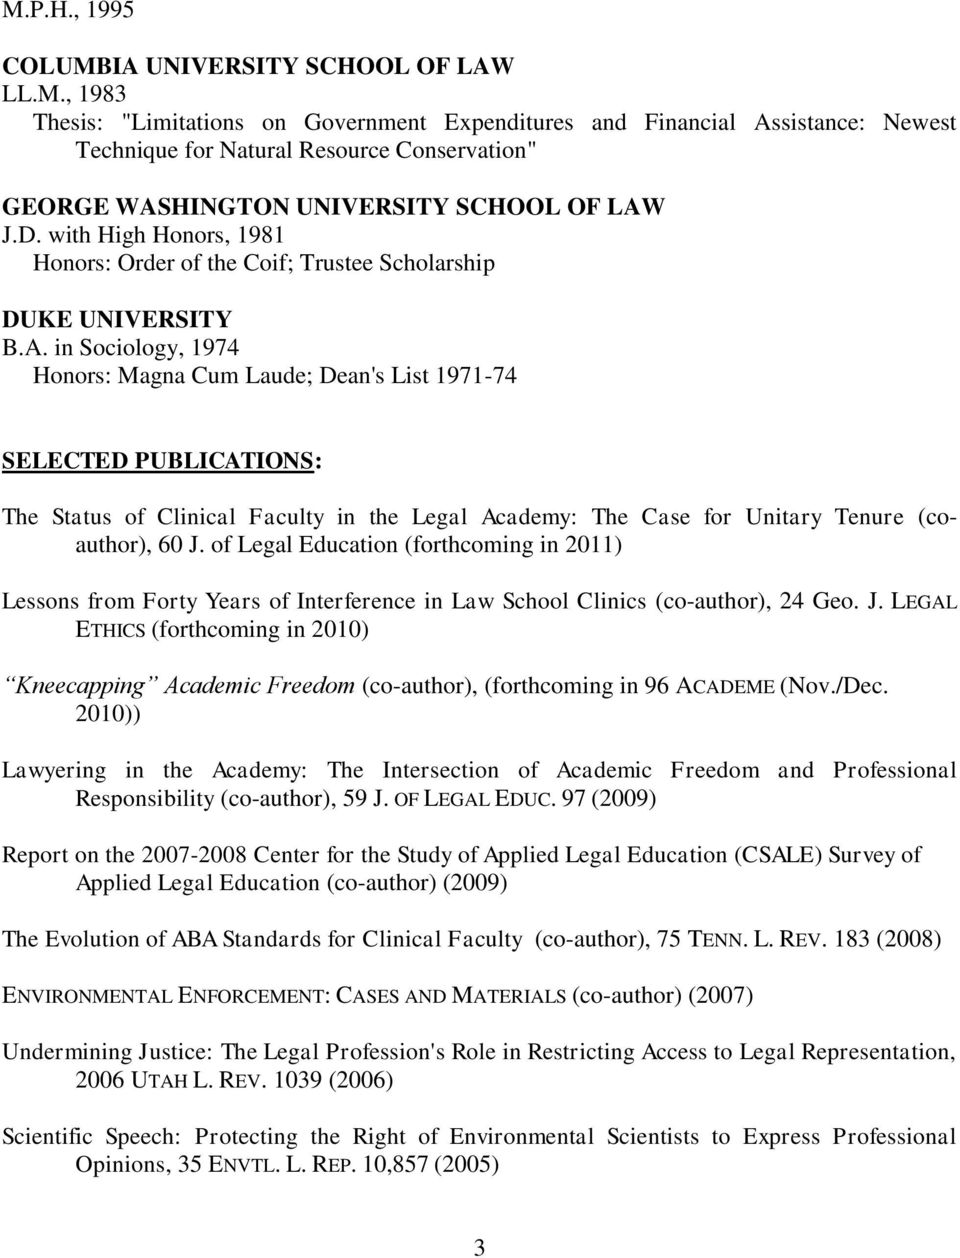 in Sociology, 1974 Honors: Magna Cum Laude; Dean's List 1971-74 SELECTED PUBLICATIONS: The Status of Clinical Faculty in the Legal Academy: The Case for Unitary Tenure (coauthor), 60 J.